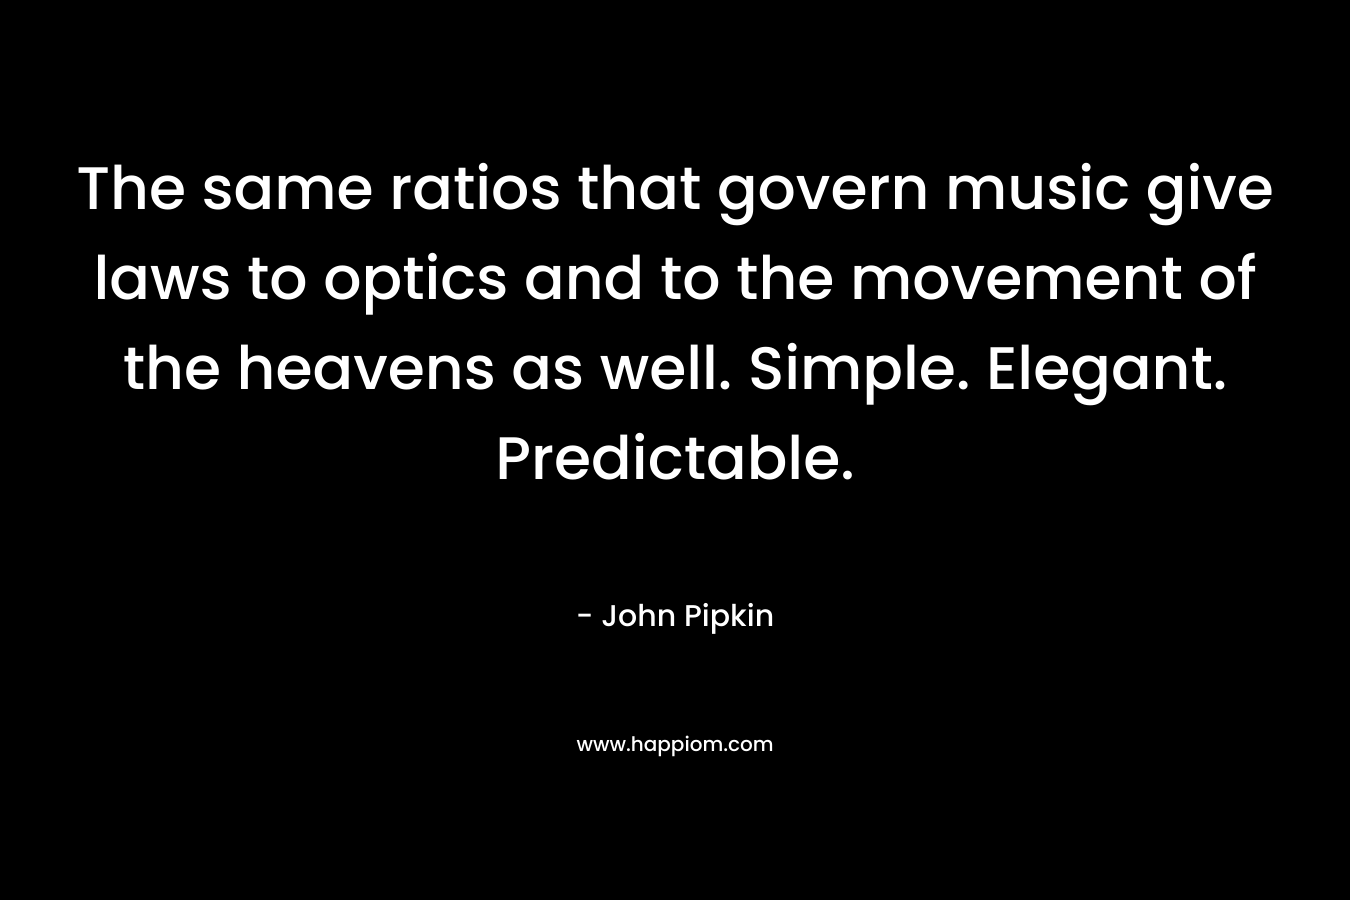 The same ratios that govern music give laws to optics and to the movement of the heavens as well. Simple. Elegant. Predictable.